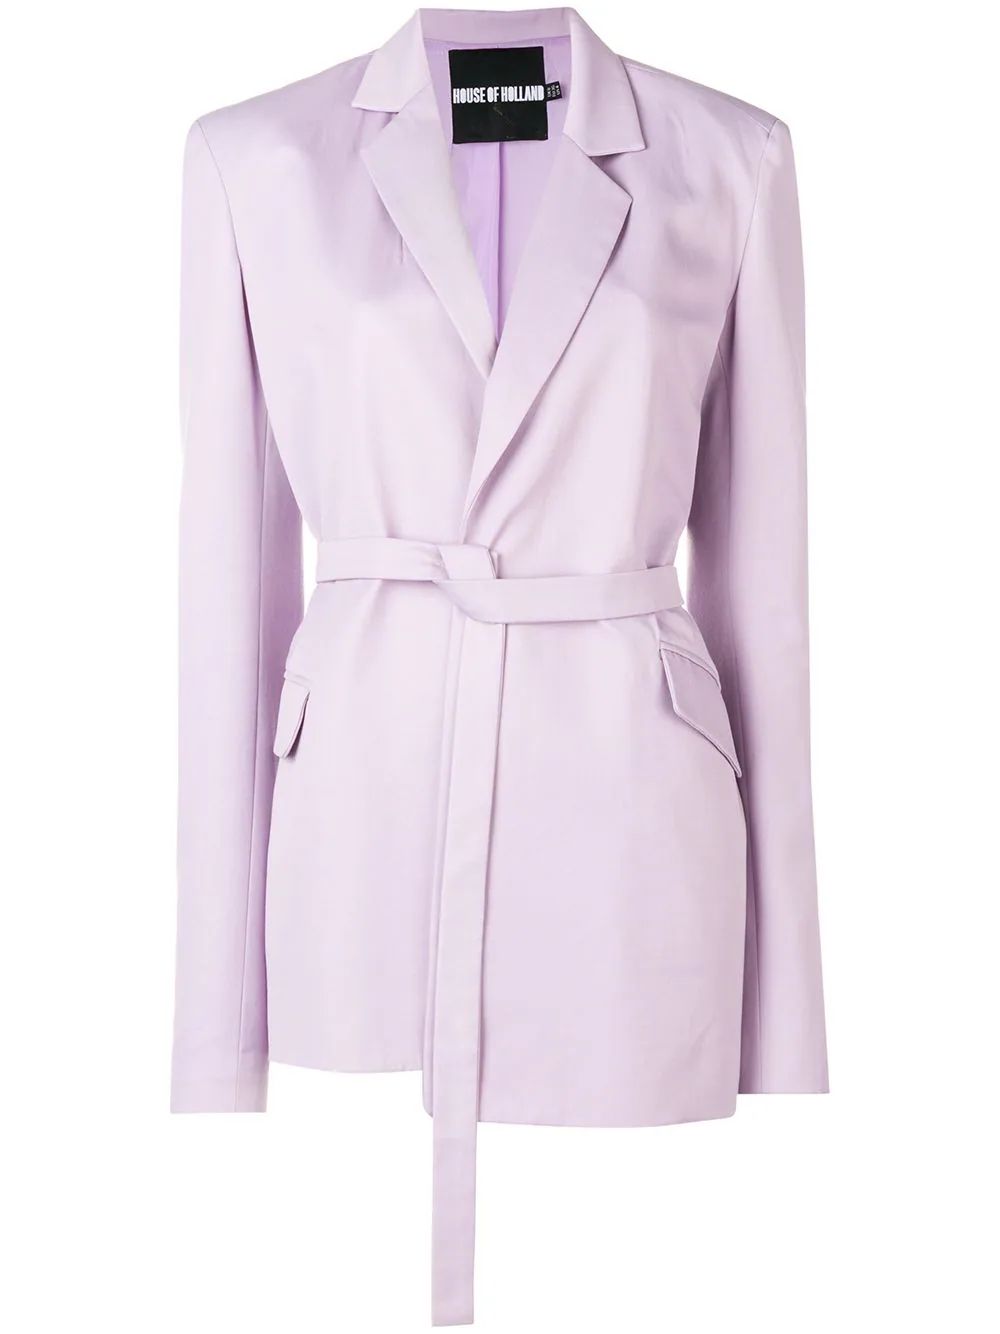 House Of Holland tailored blazer - Pink | FarFetch Global